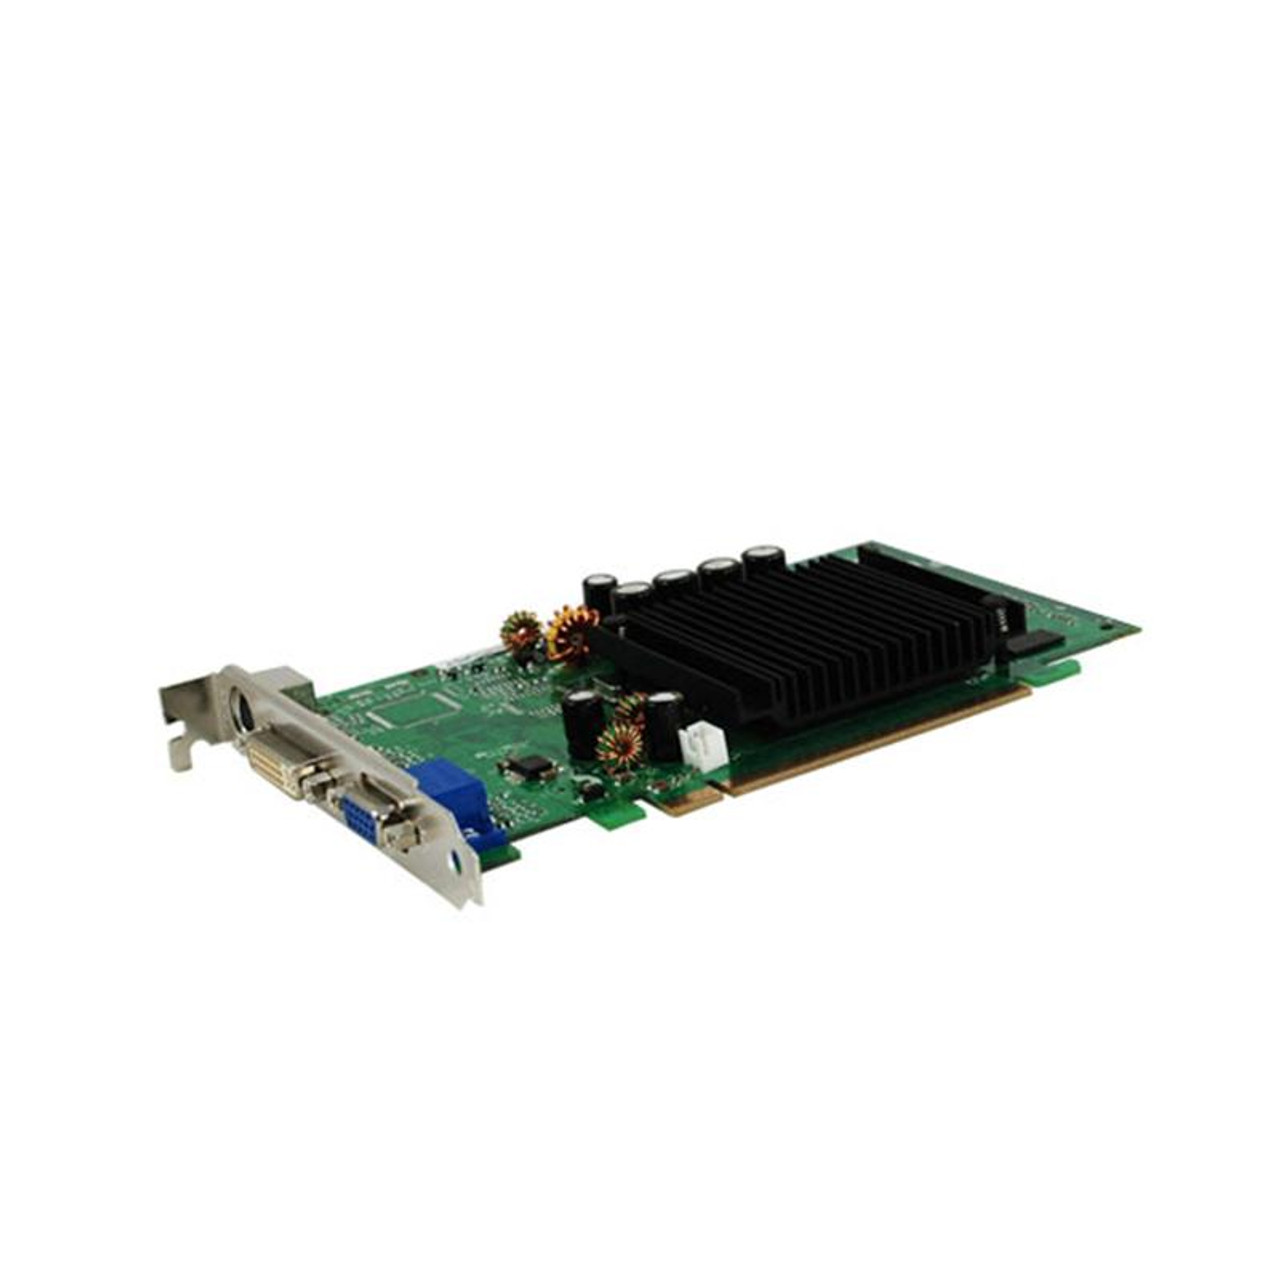 VCE256-P2-N429 EVGA GeForce 7200GS 256MB PCI Express DVI/ TV-Out Video Graphics Card